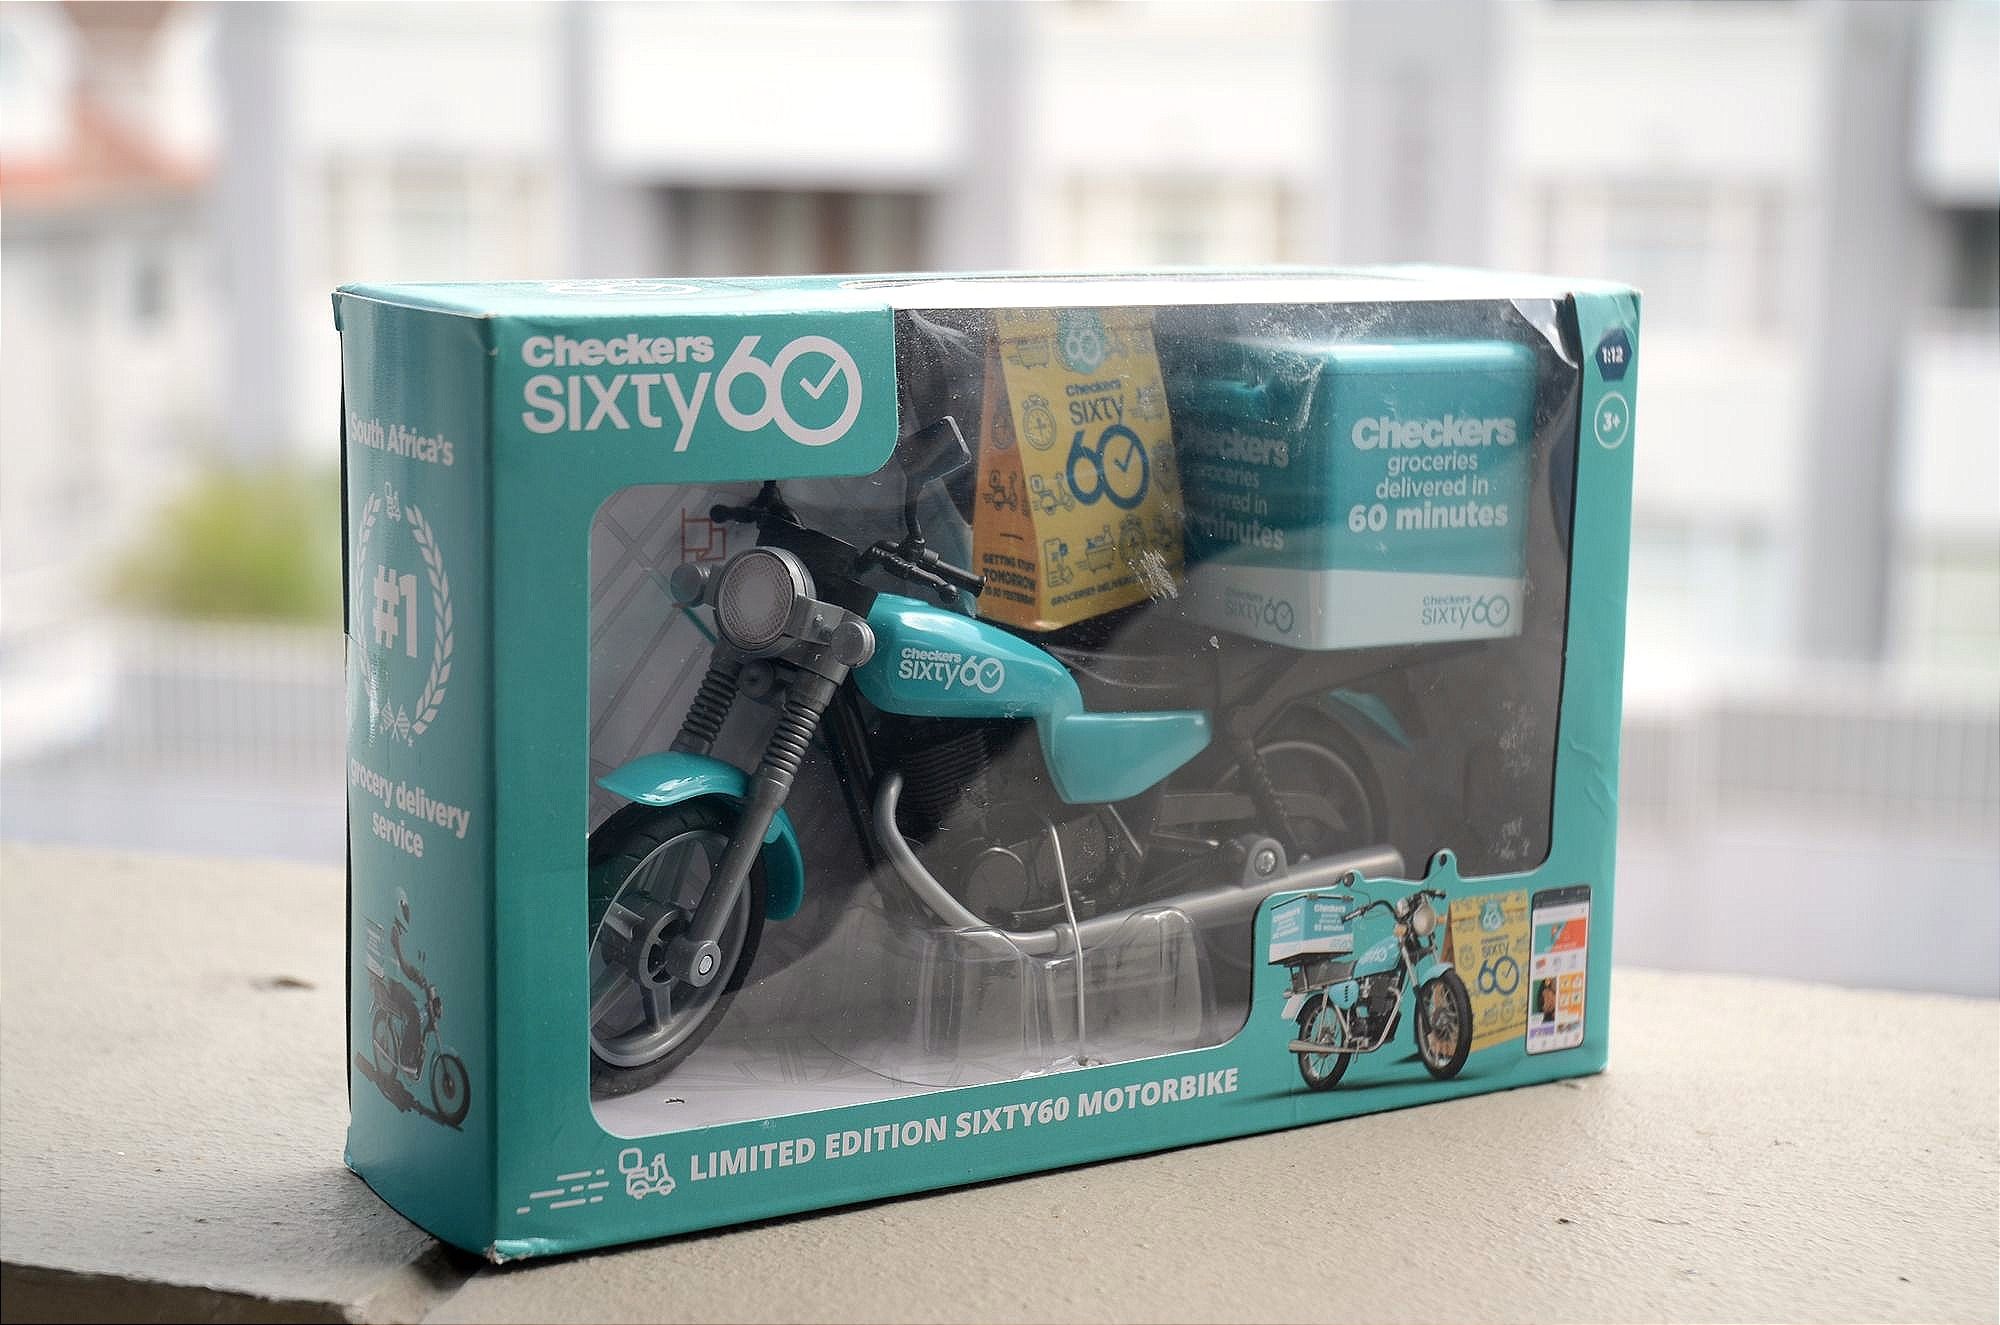 The Checkers Sixty60 delivery bike is smart brand building